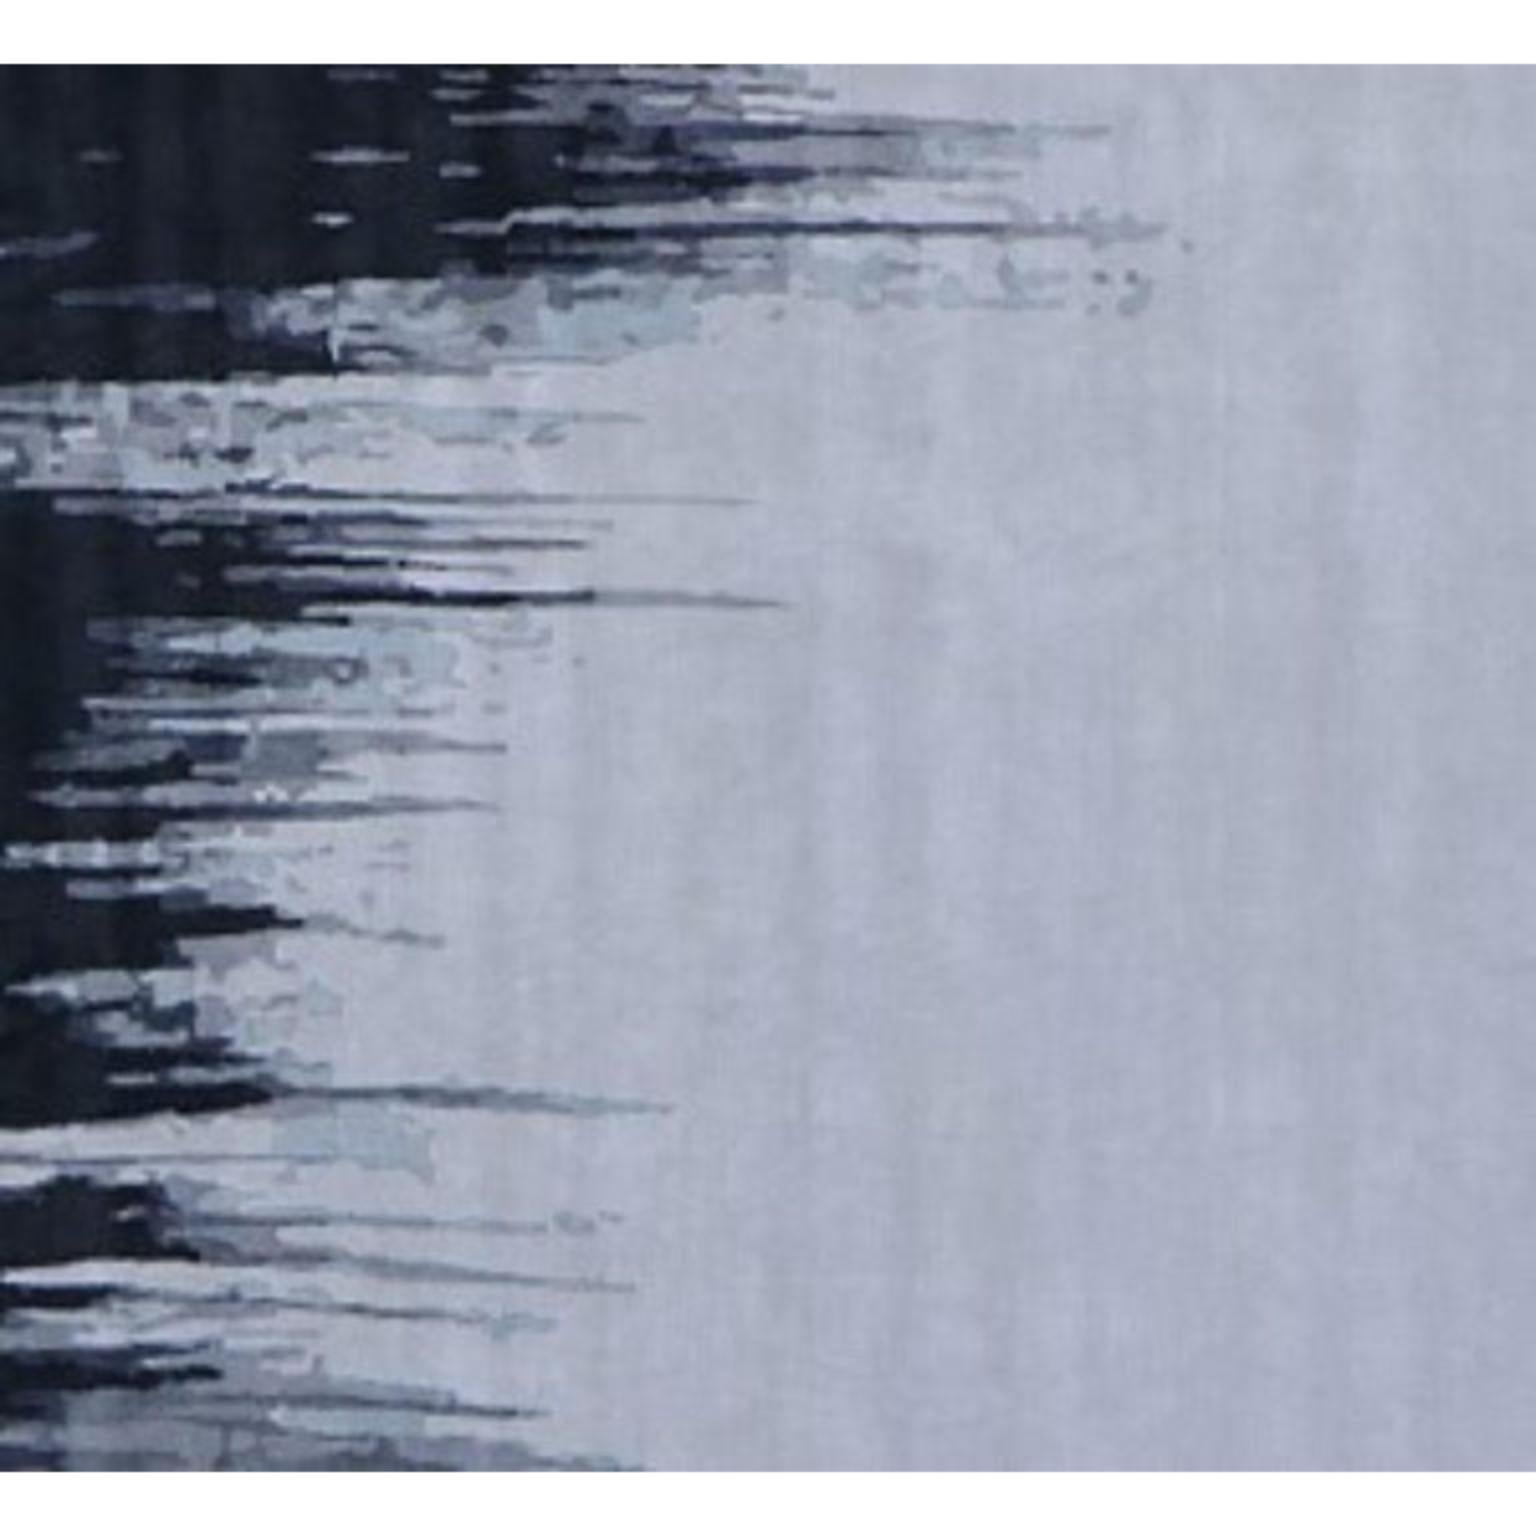 Dip-dye small rug by Art & Loom
Dimensions: D243.4 x H304.8 cm
Materials: New Zealand wool & Chinese silk
Quality (Knots per Inch): 100
Also available in different dimensions.

Samantha Gallacher has always had a keen eye for aesthetics,